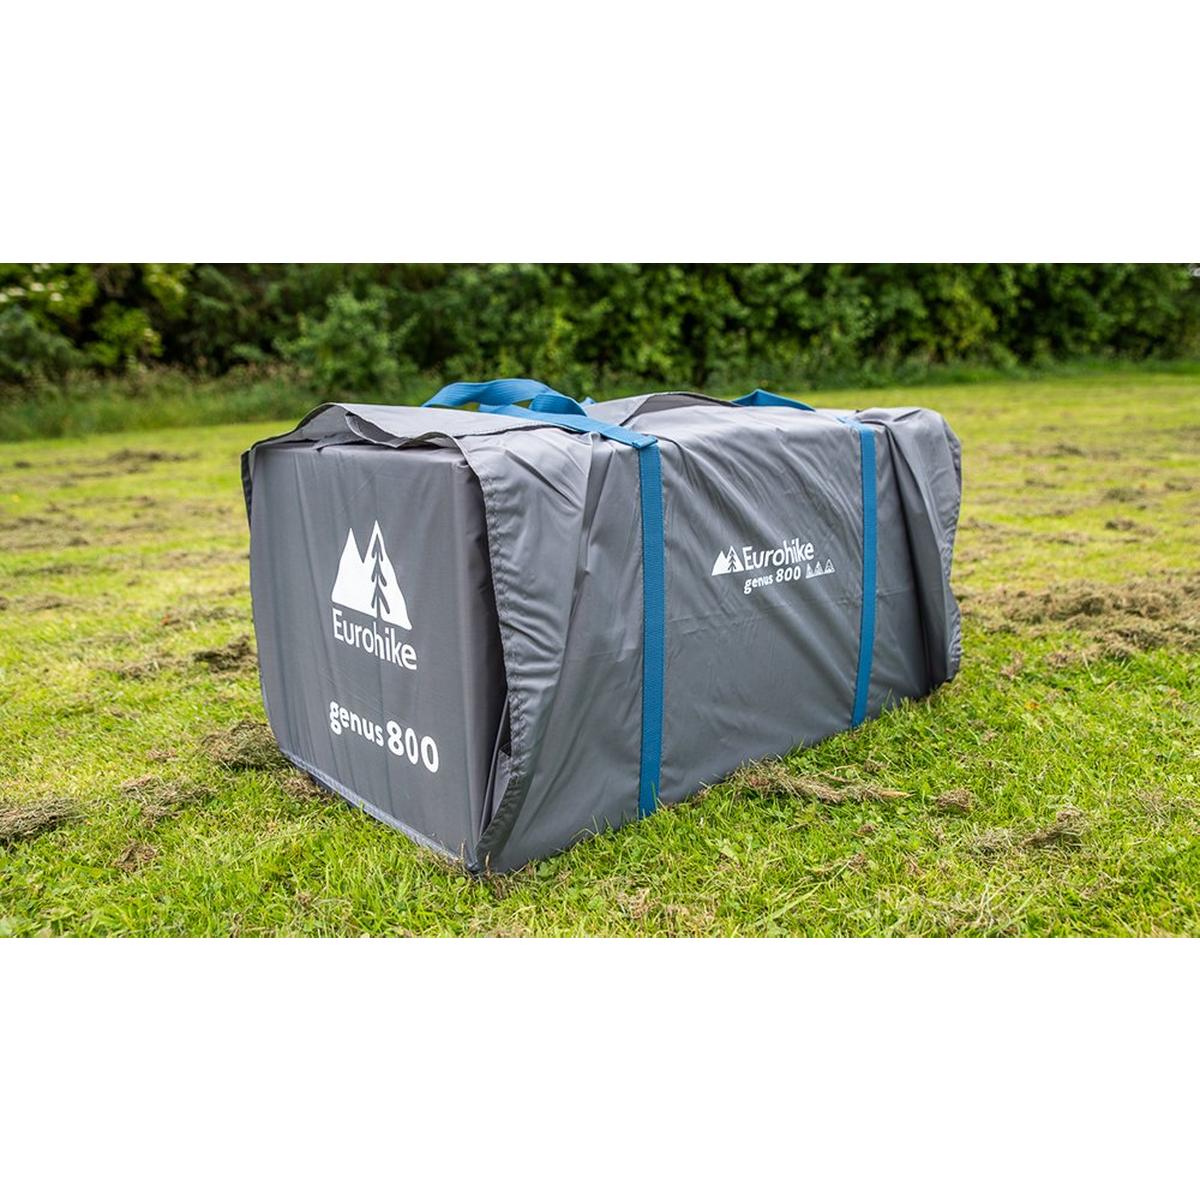 Eurohike Genus Air 800 | 8-Person Inflatable Tent